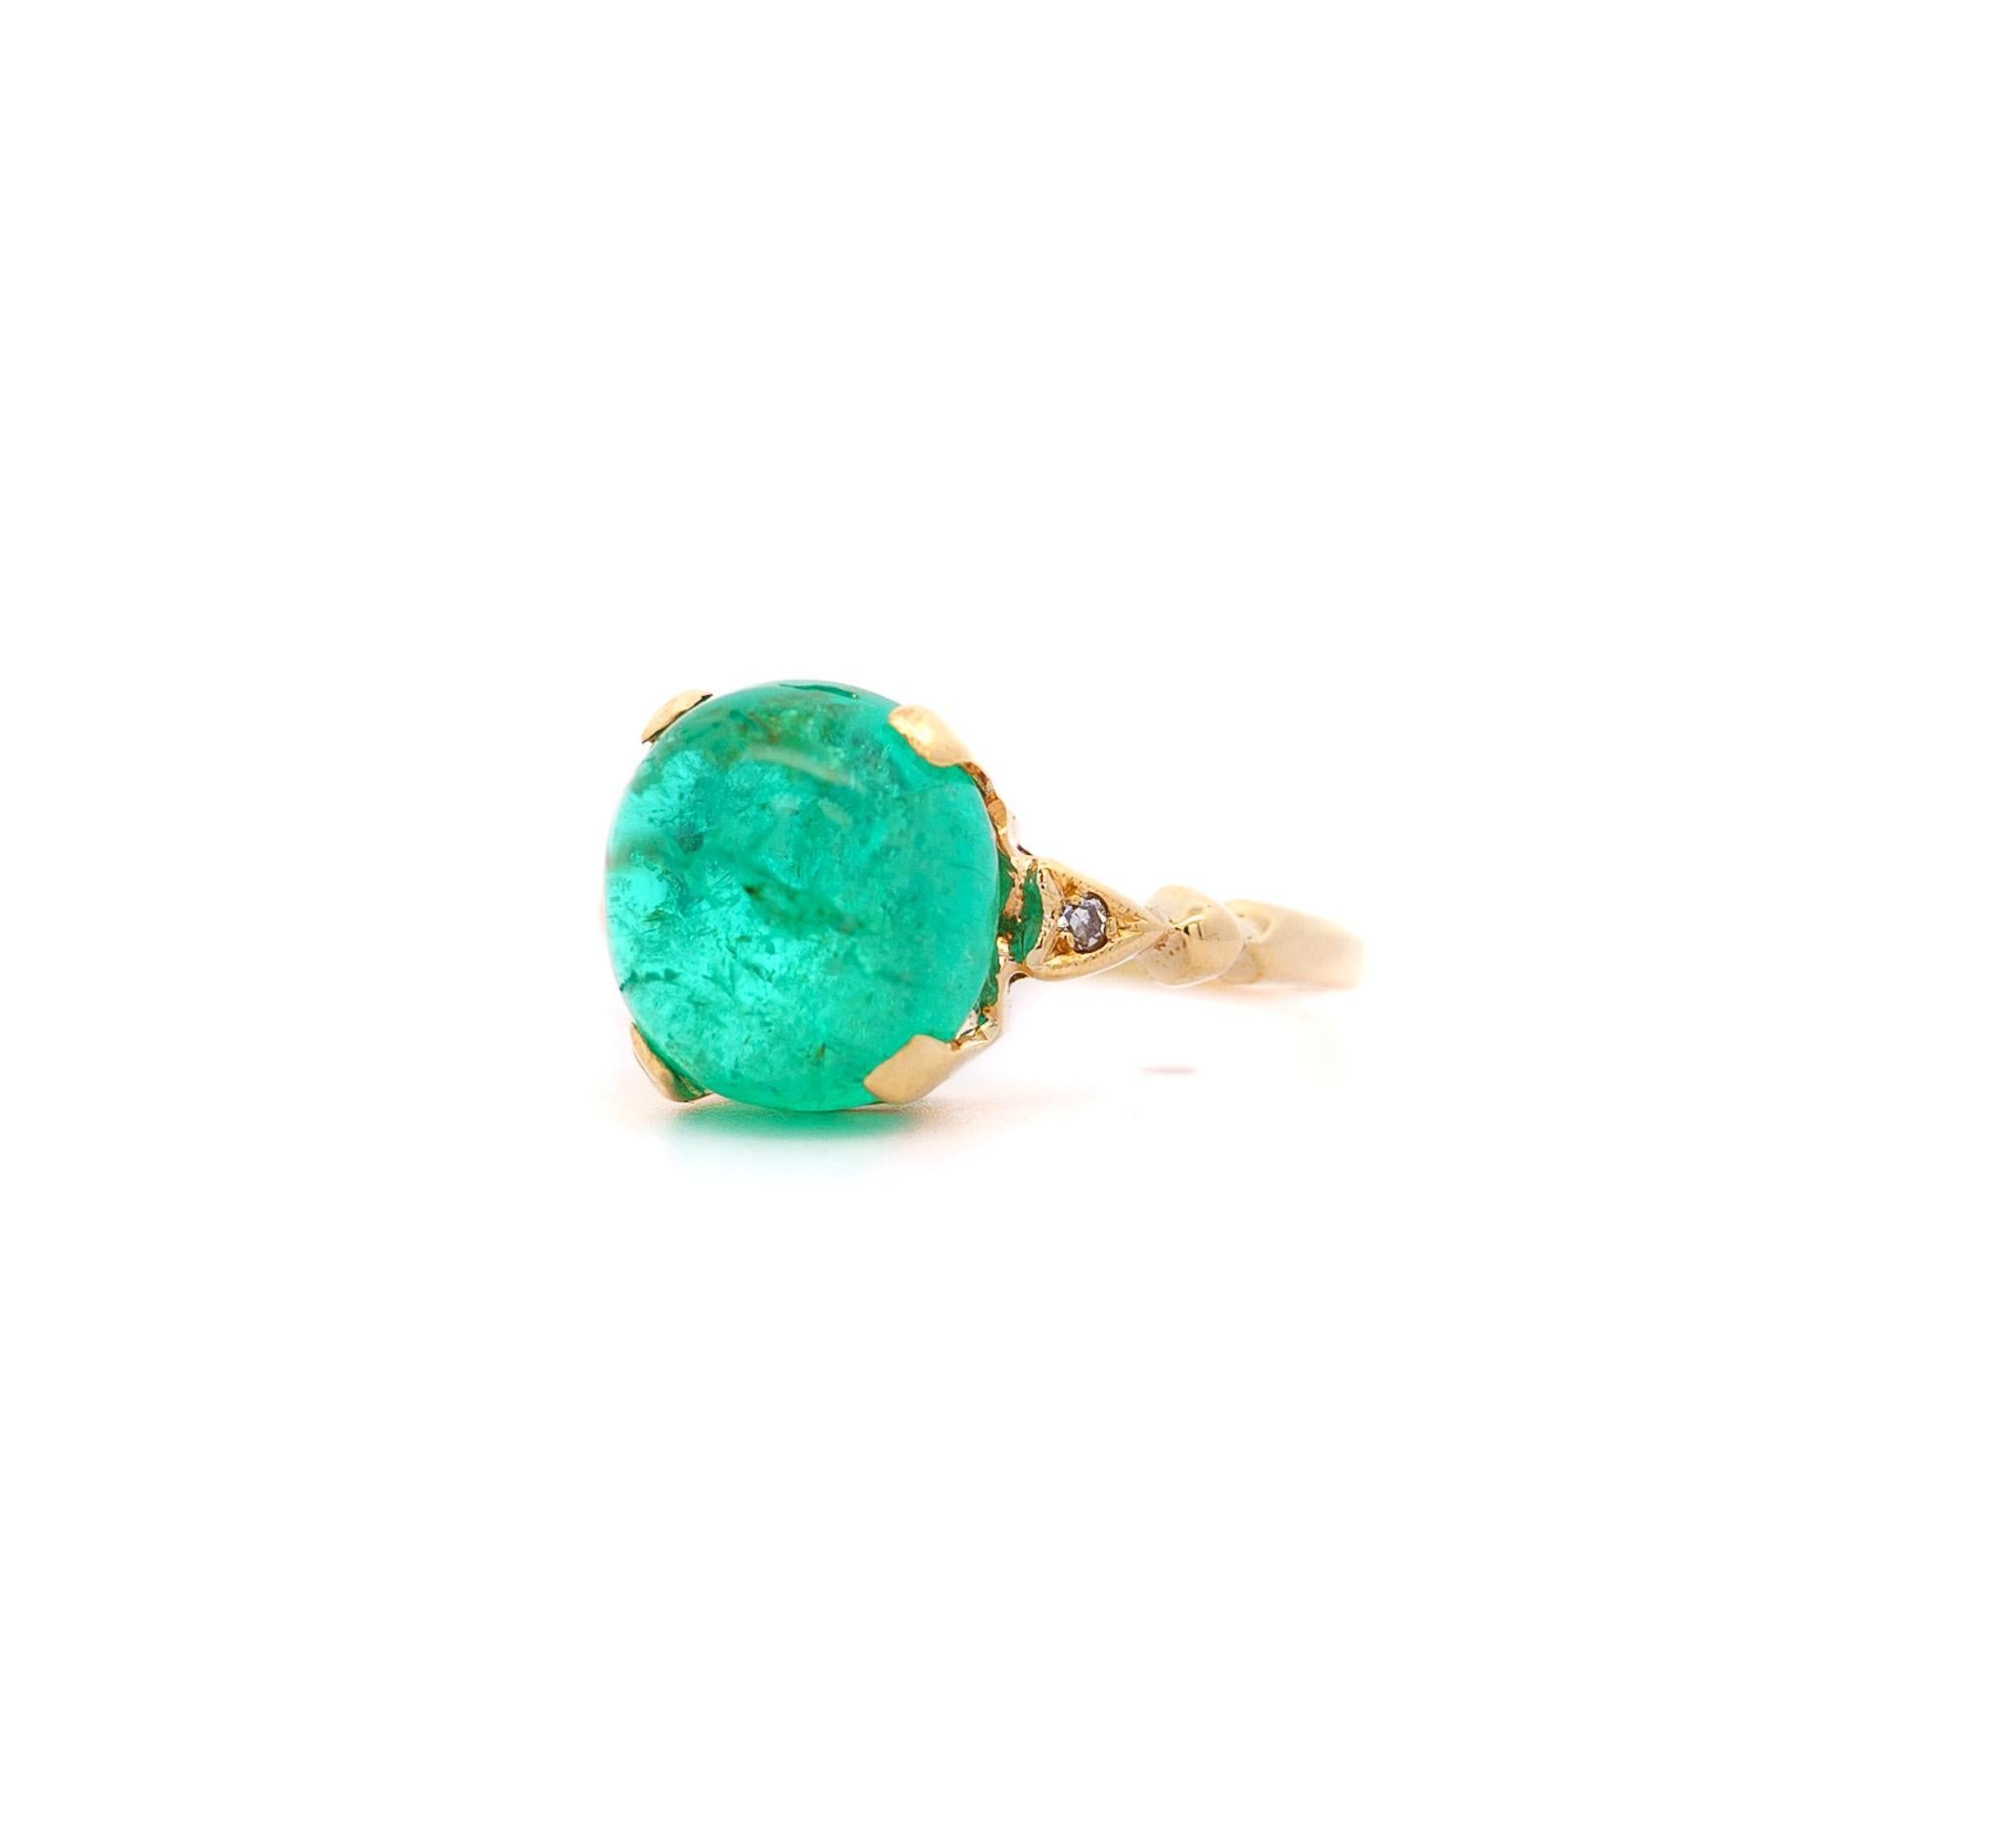 Colombian Emerald and Diamond Ring in 14K Yellow Gold. 

This multi-stone ring features a vibrantly saturated 5-carat Colombian emerald with an attractive cabochon cut. It is paired with 2 round-cut white diamonds and vintage filigree-style